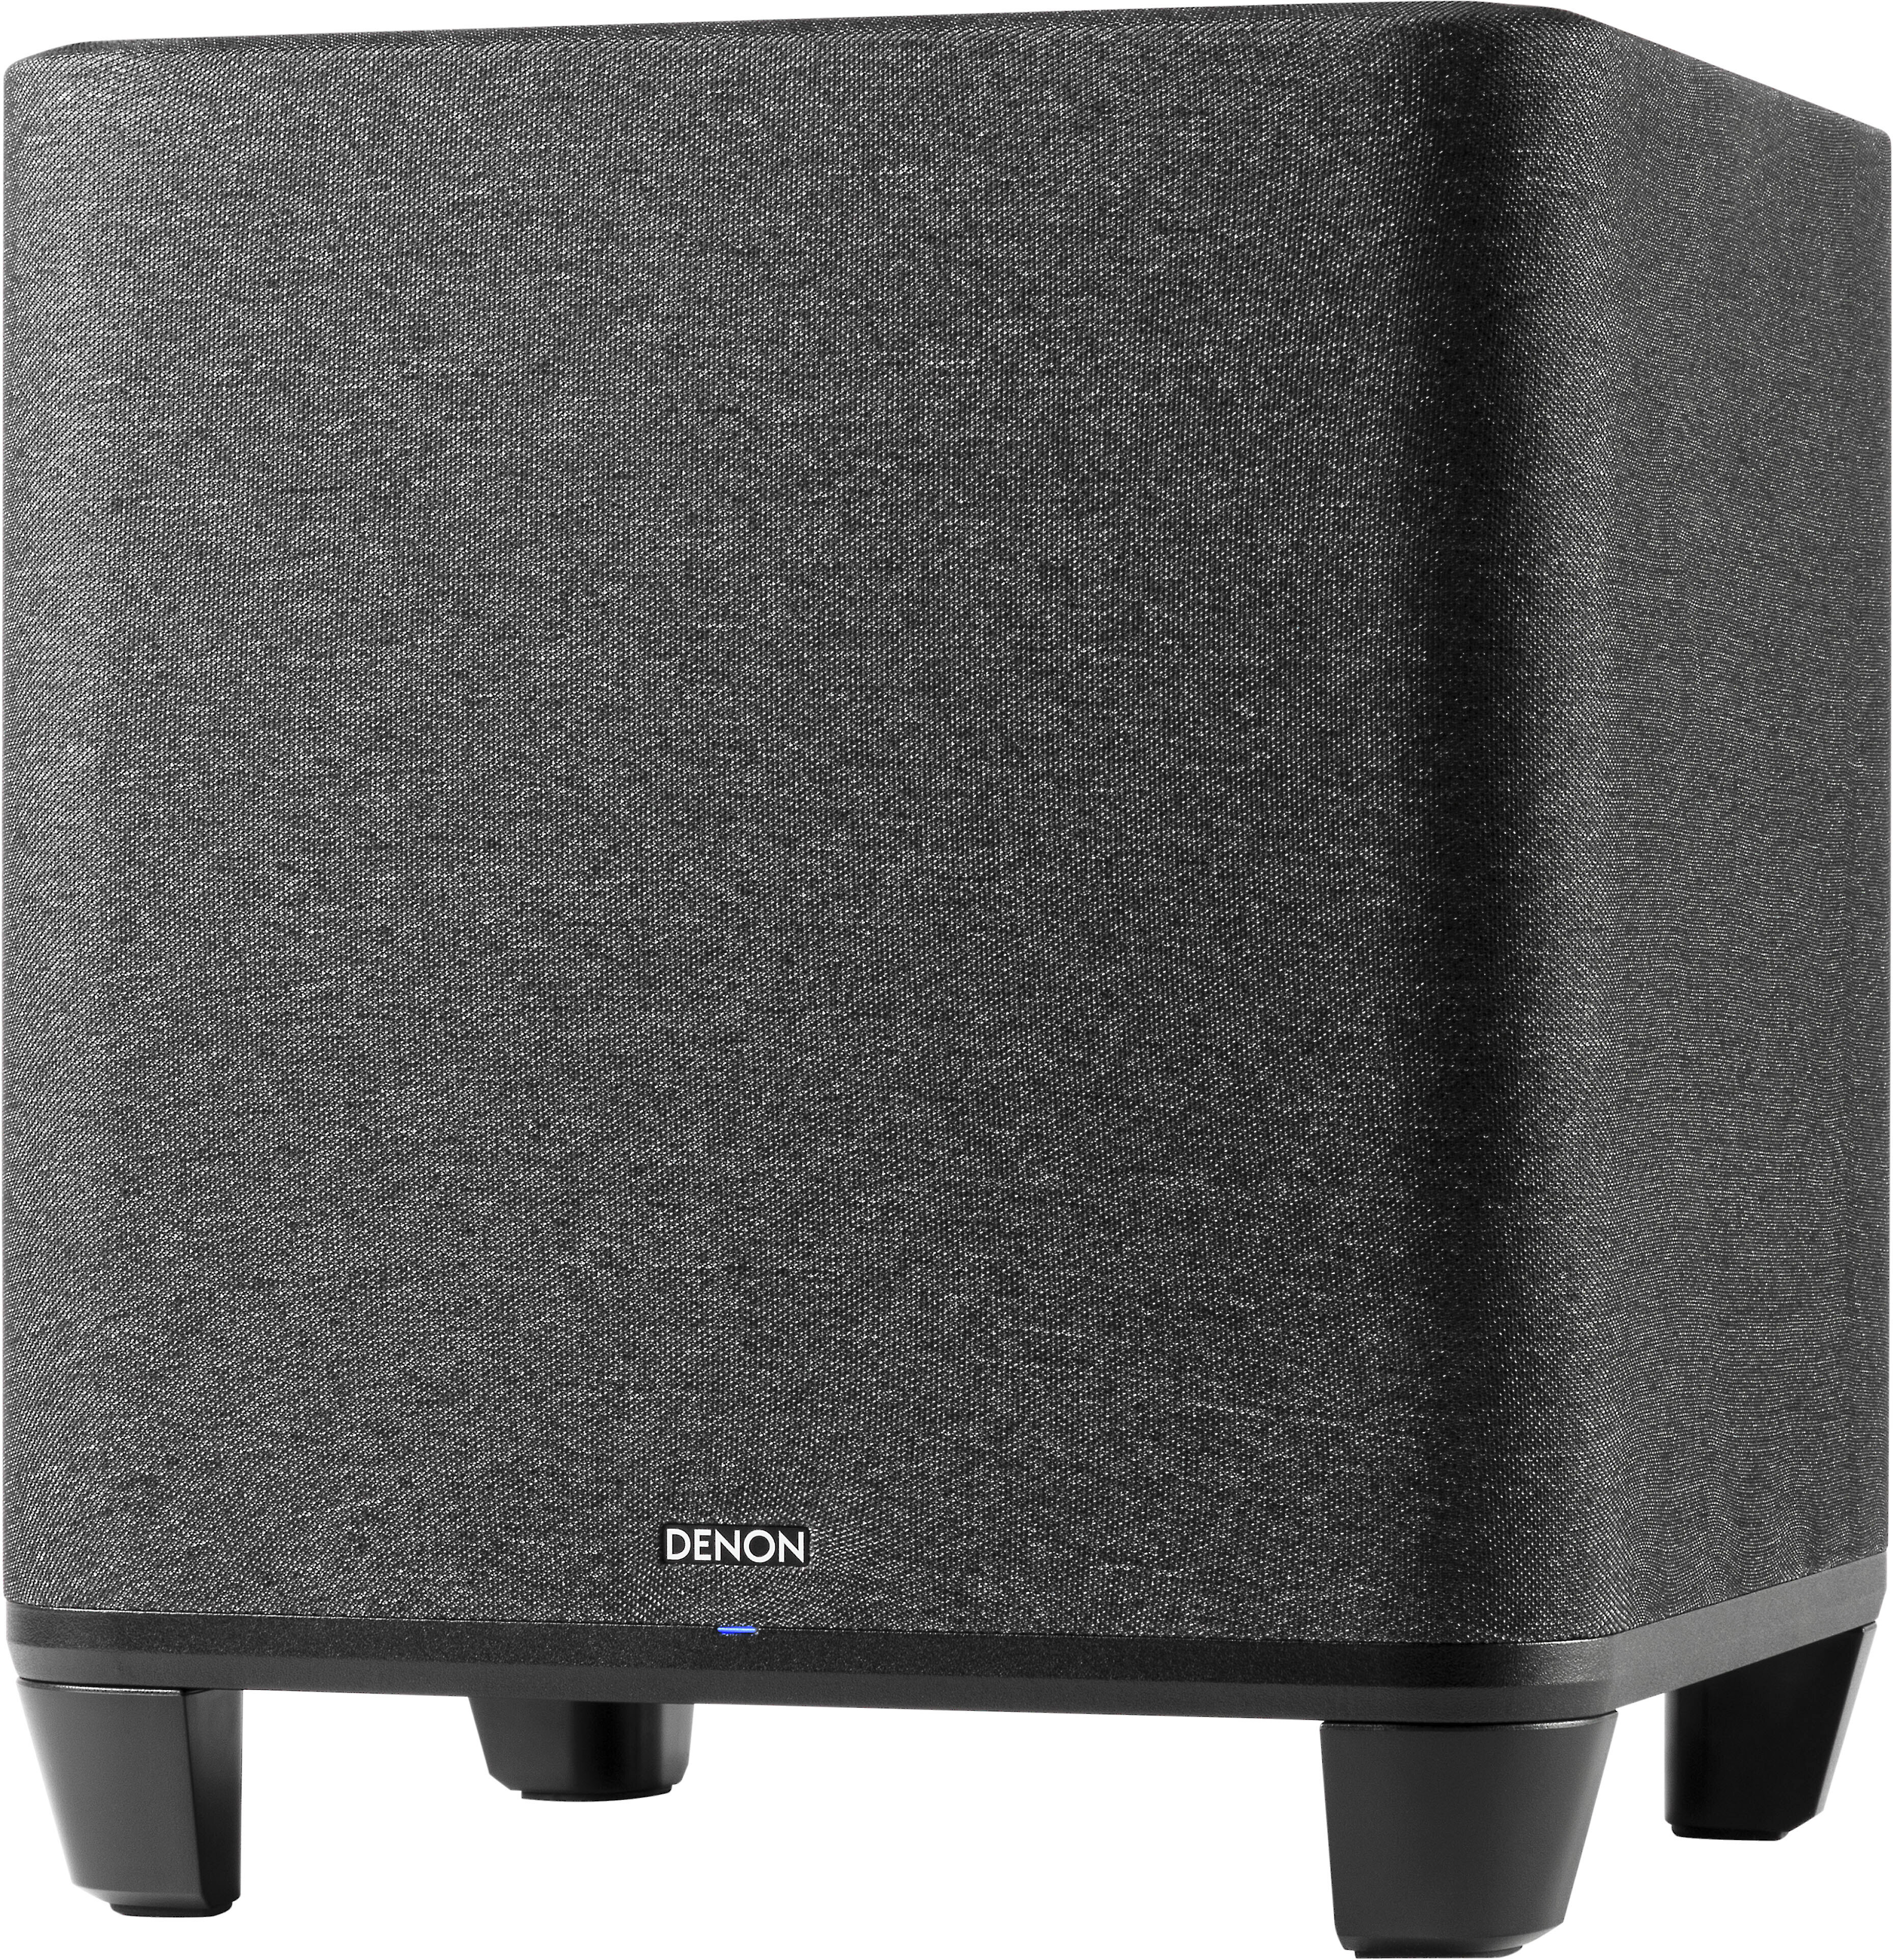 Product Videos: Denon Home Subwoofer 8